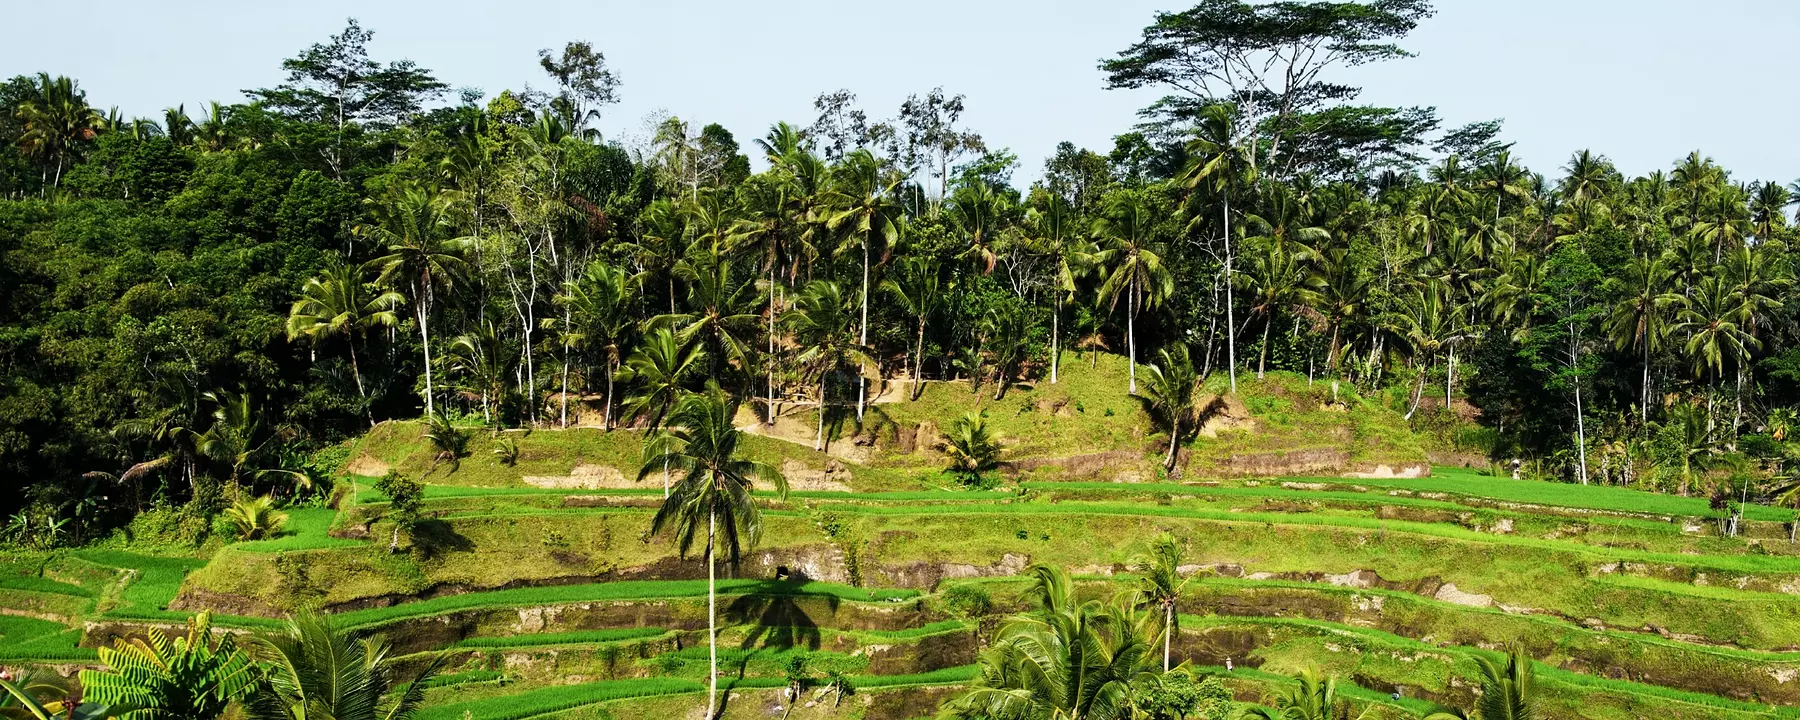 Rice fields and coconut trees in Bali